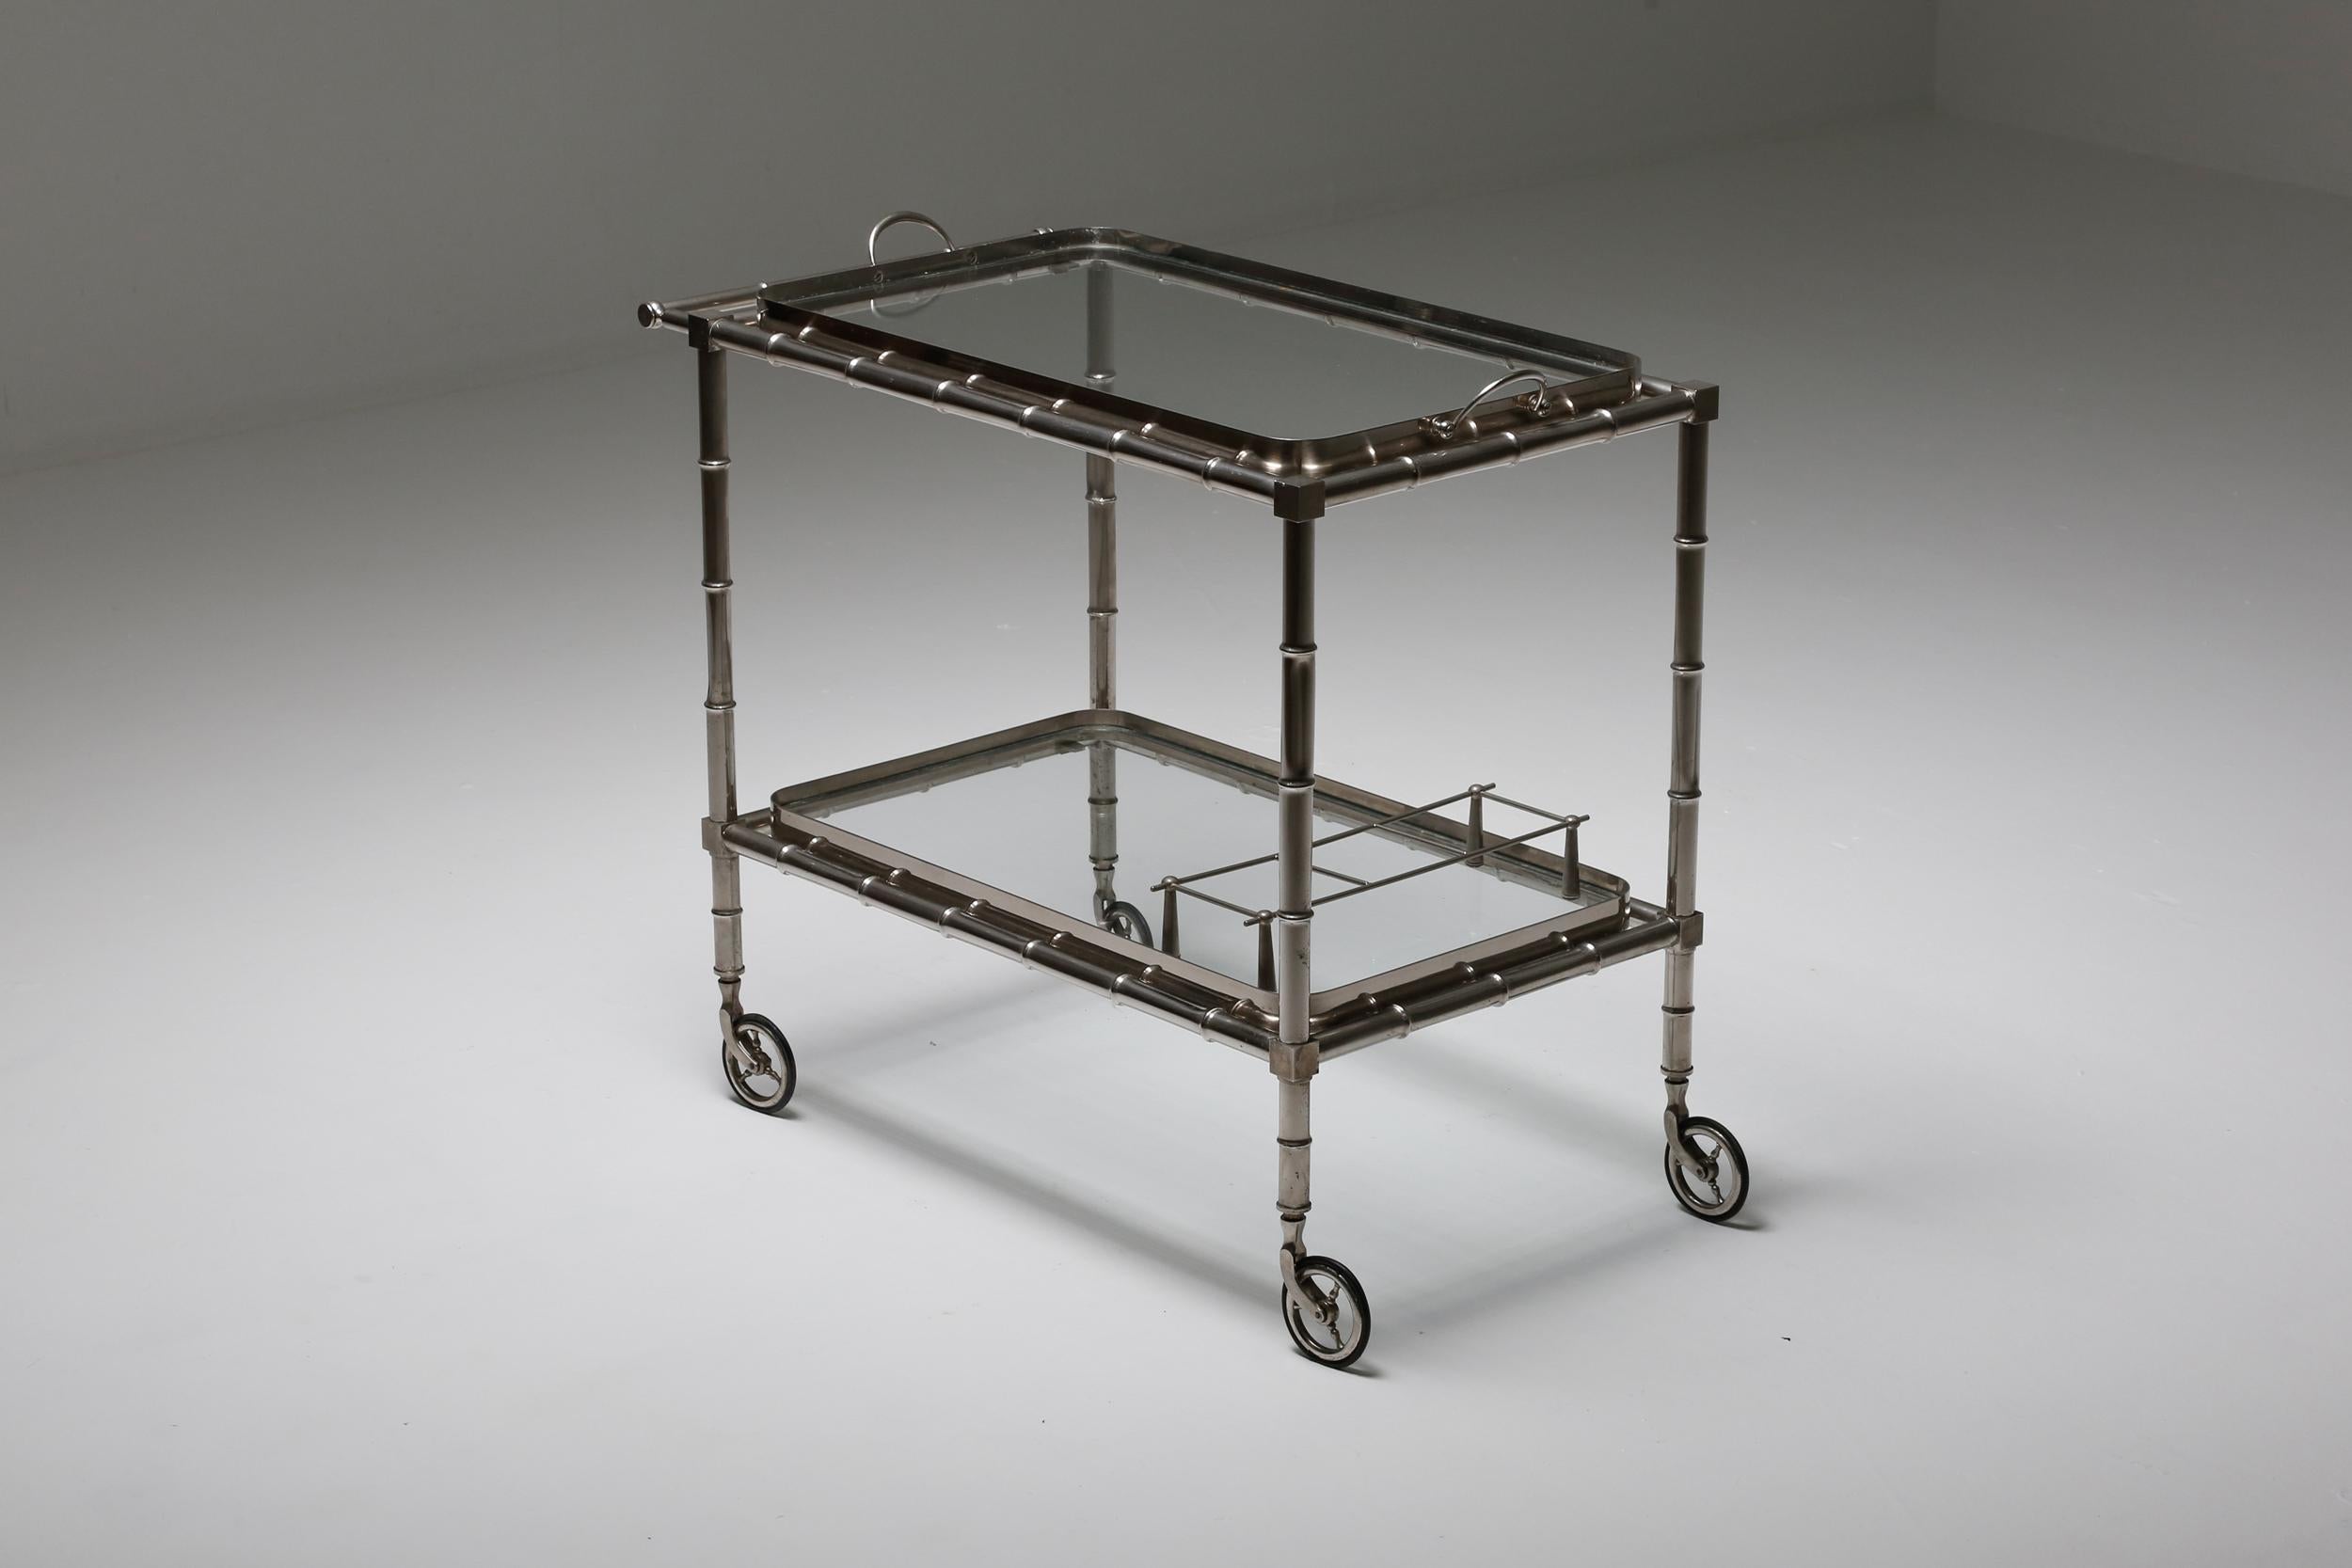 Elegant chrome trolley on wheels exudes in regency design, making it a sophisticated addition to any space. Featuring two glass trays, it serves as an ideal solution for both serving and storing drinks, as well as other items. Crafted in France